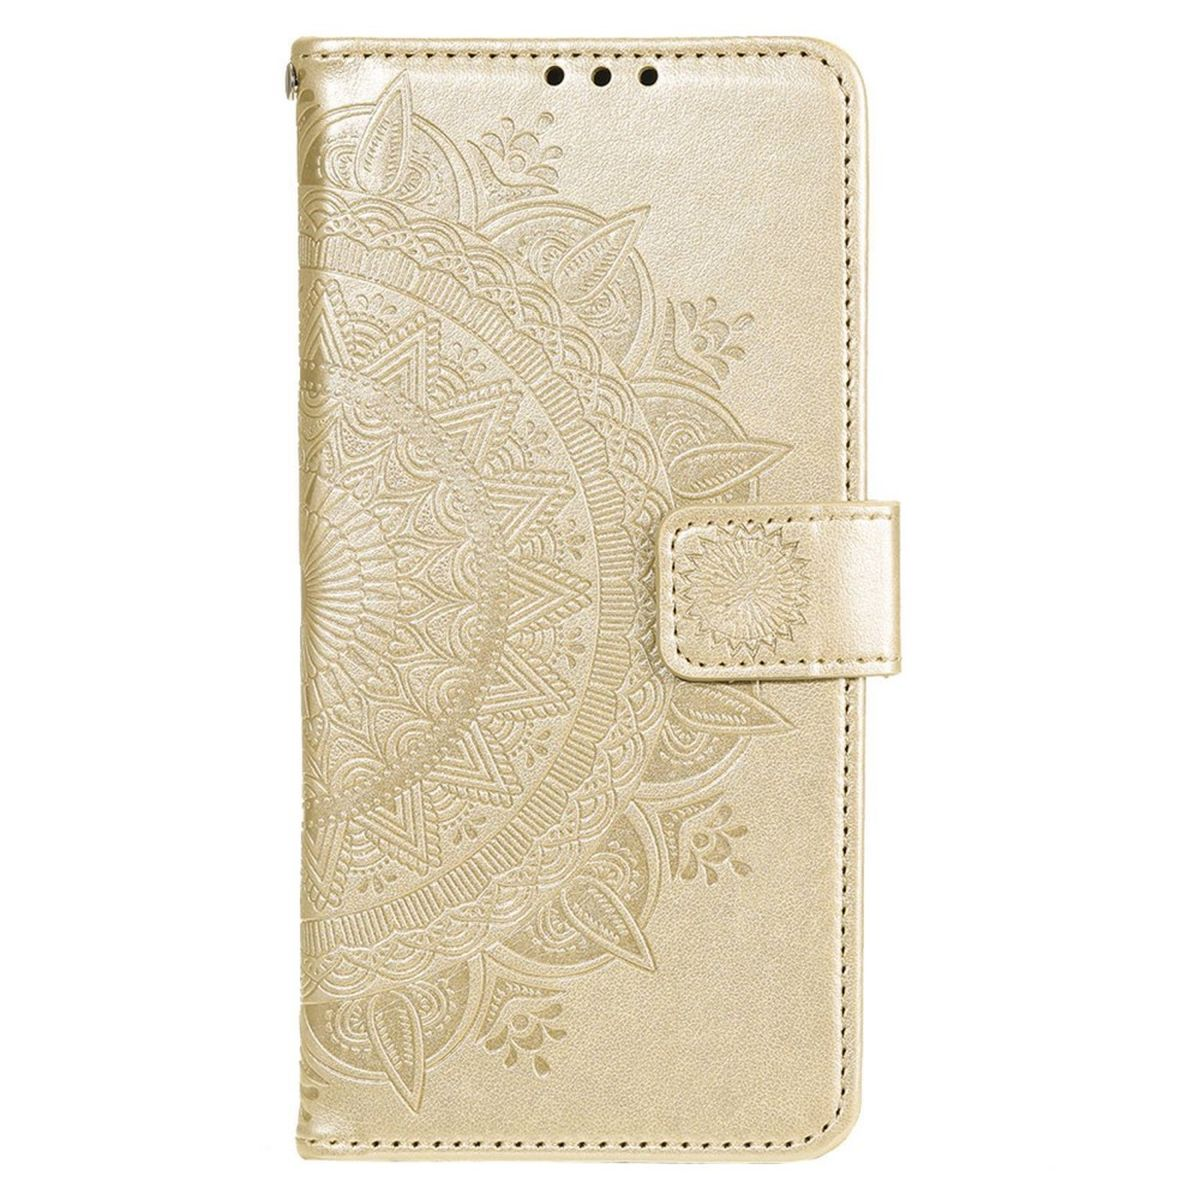 5G, mit Bookcover, COVERKINGZ Klapphülle Gold Muster, Samsung, M53 Mandala Galaxy